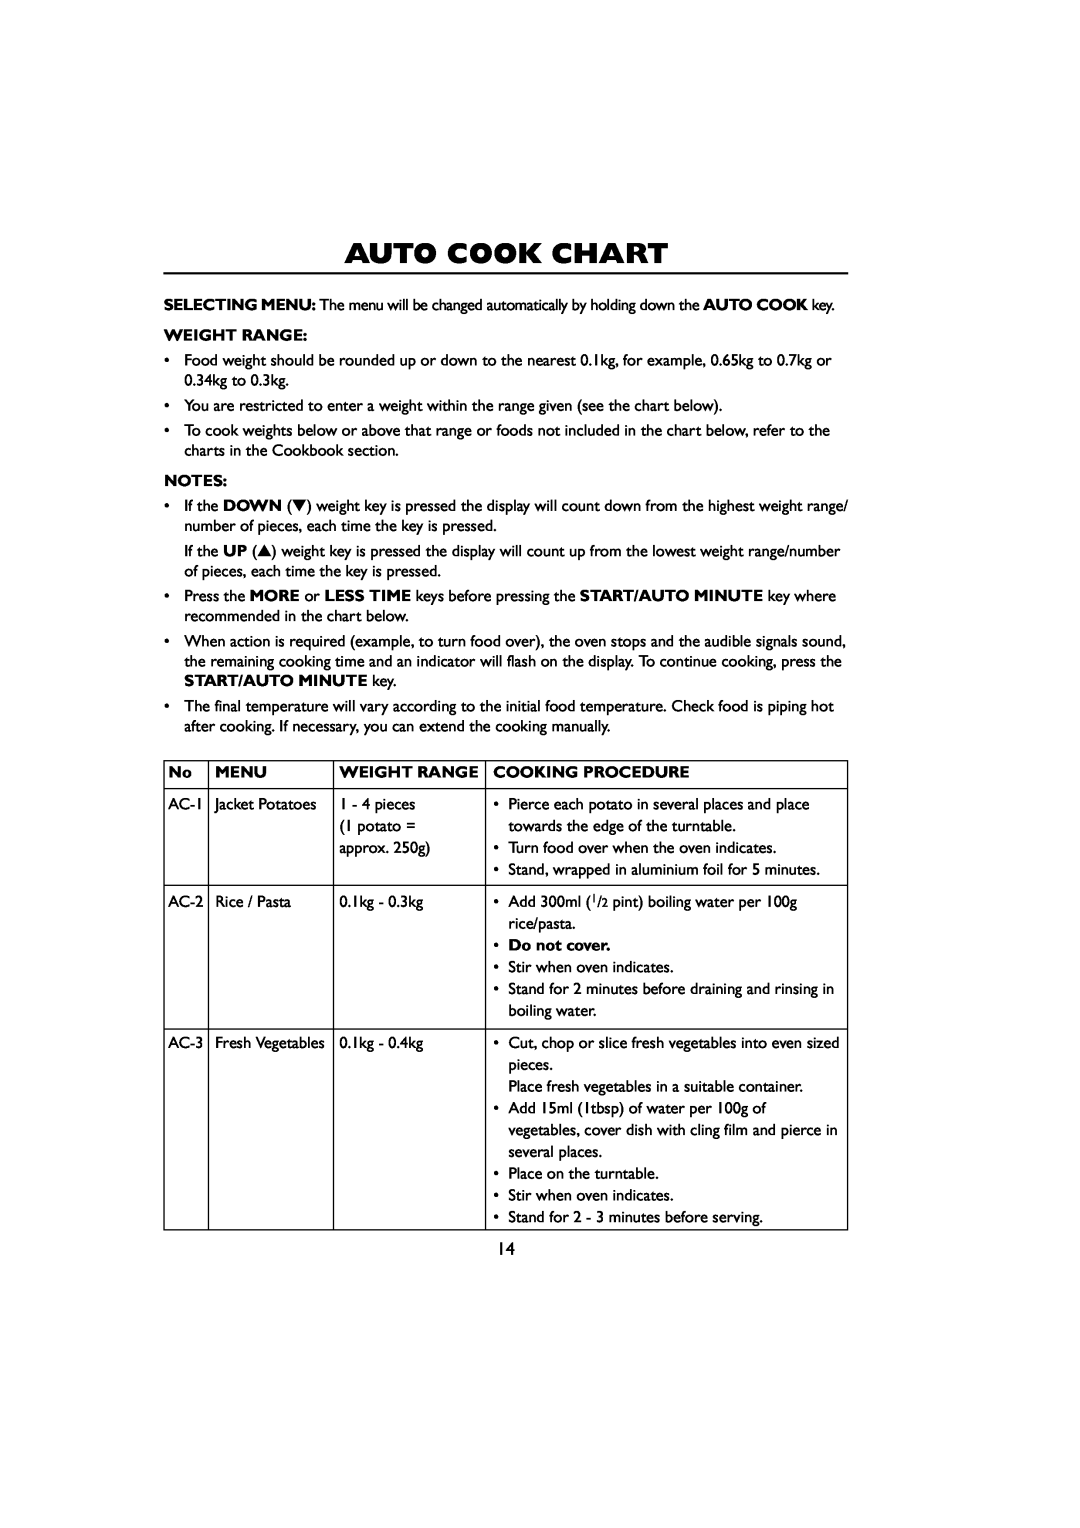 Sharp R-259 operation manual Auto Cook Chart, Do not cover, Weight Range, Menu, Cooking Procedure 